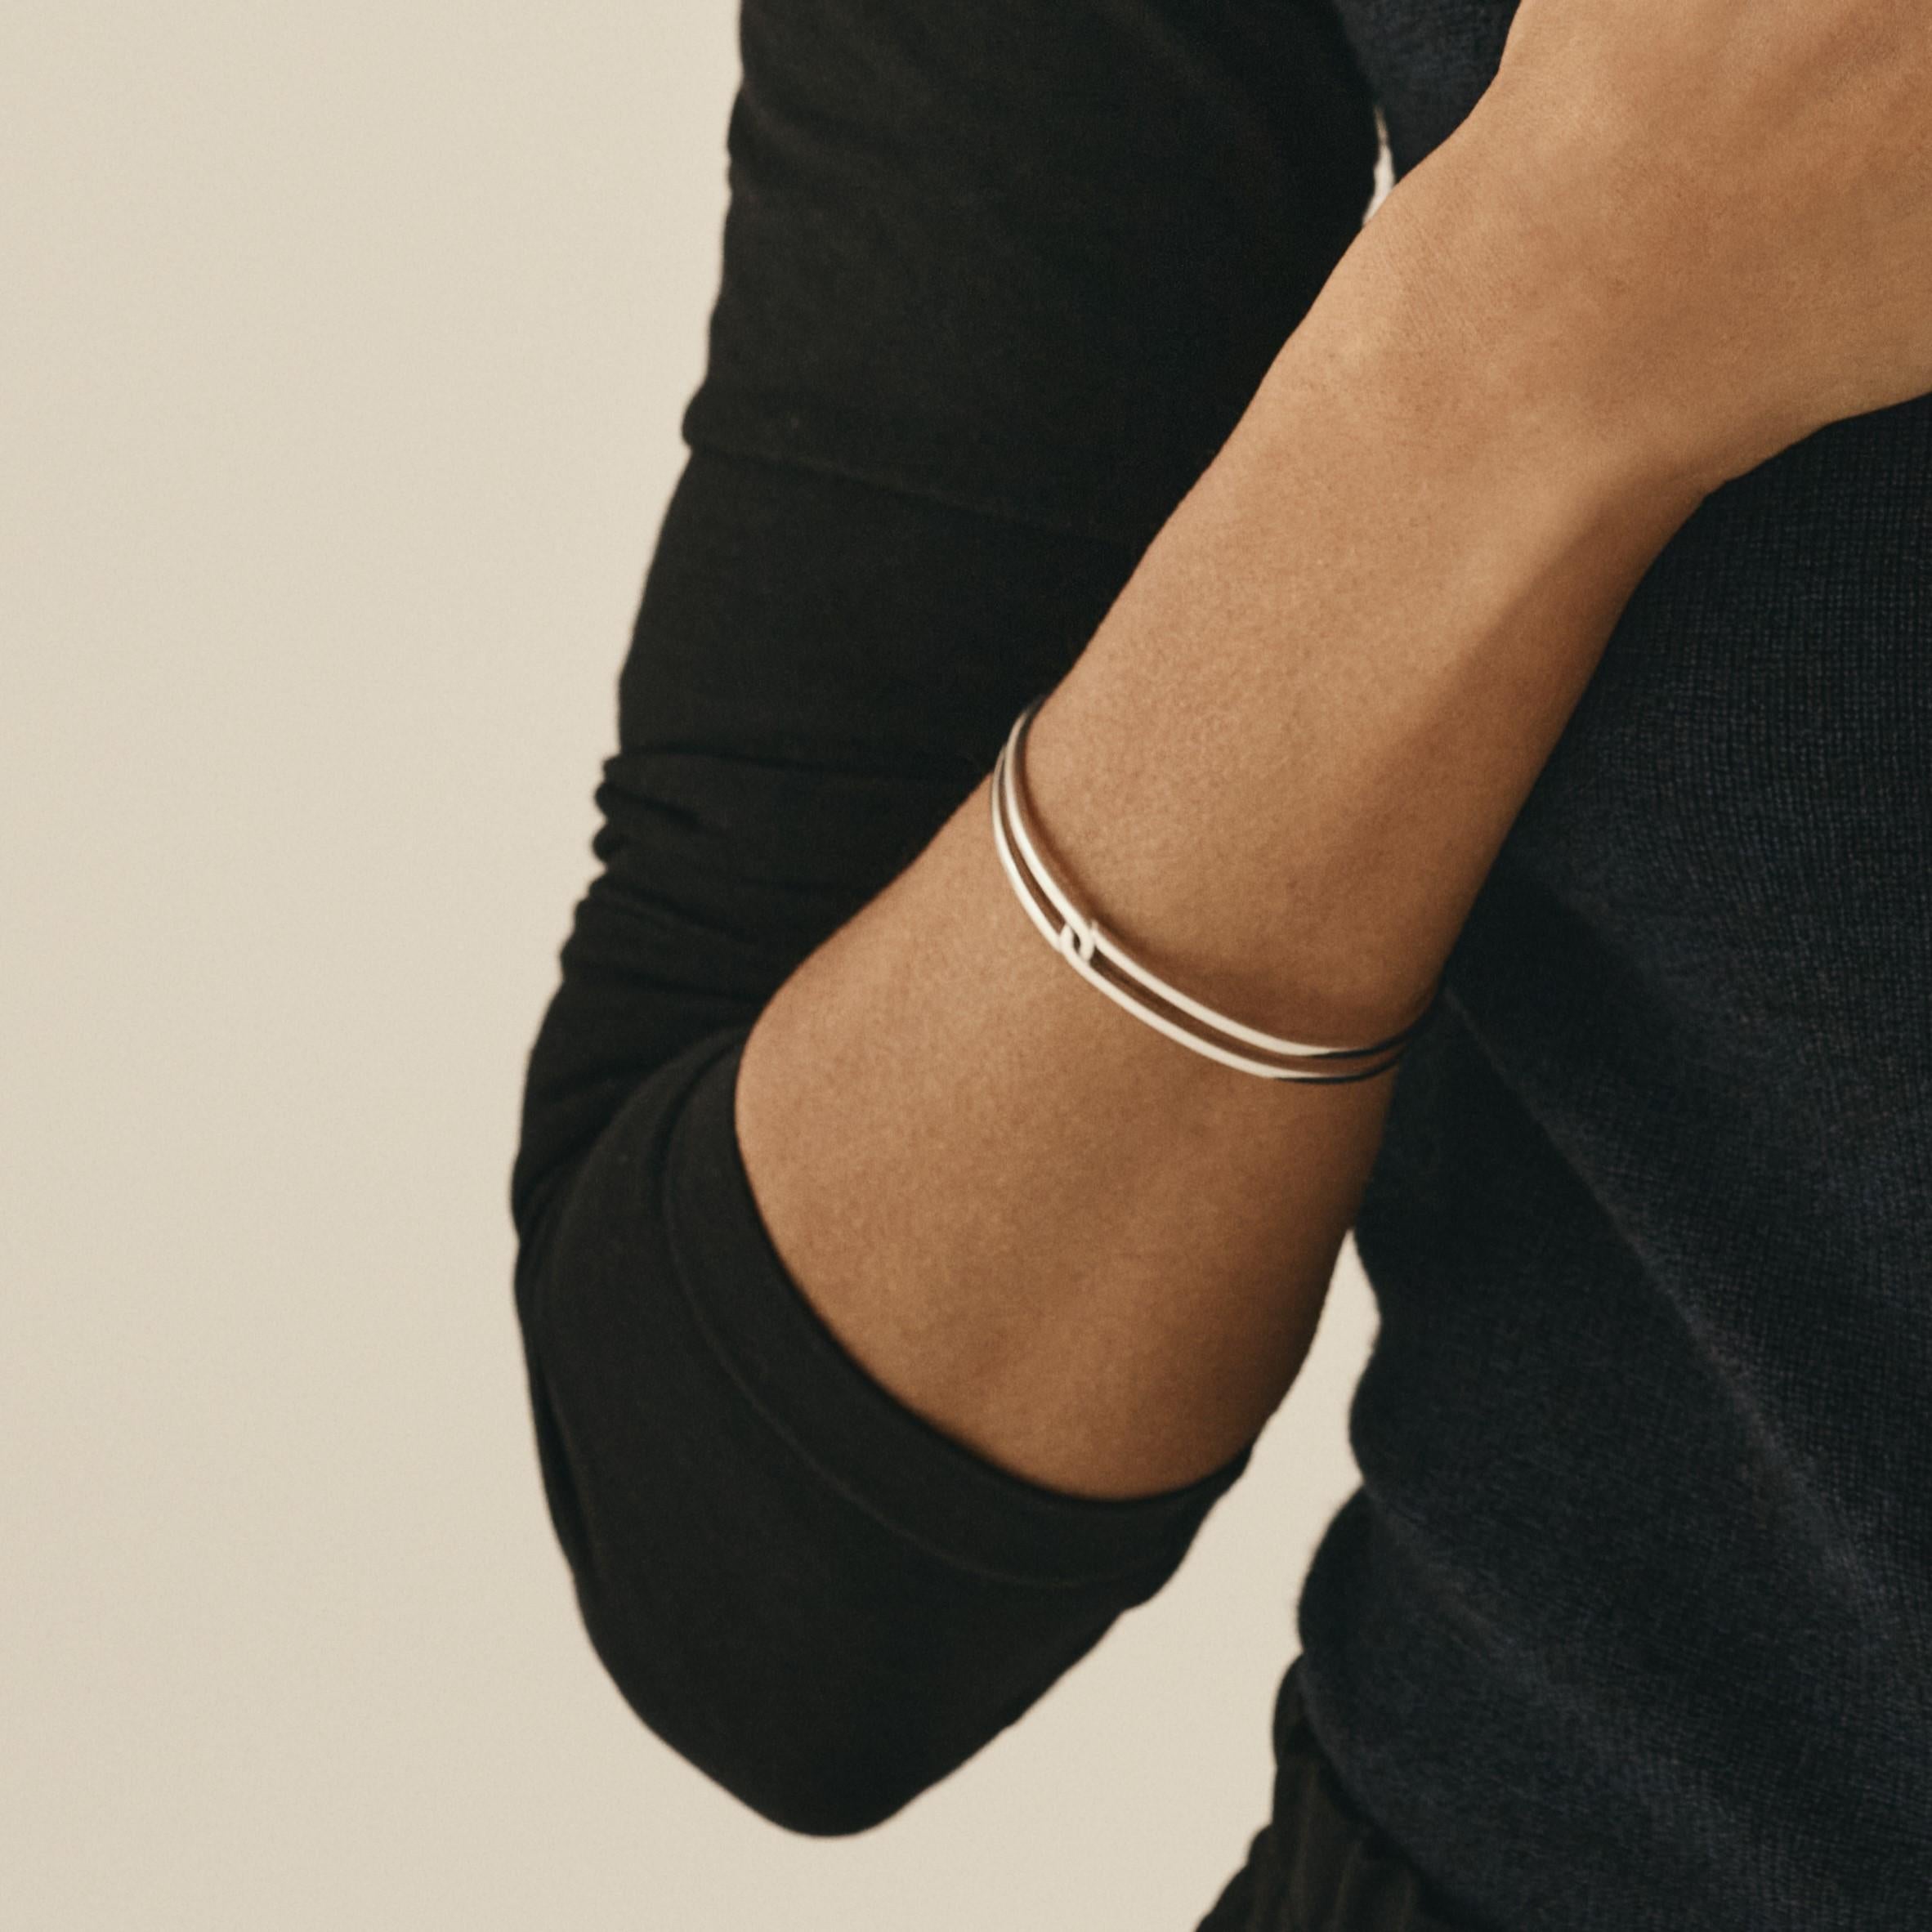 Now available in both recycled sterling silver and 18k gold

This refined add-on seamlessly blends with the existing pieces in the Oxygen Collection, offering a variety of versatile options for crafting your own distinctive, enchanting